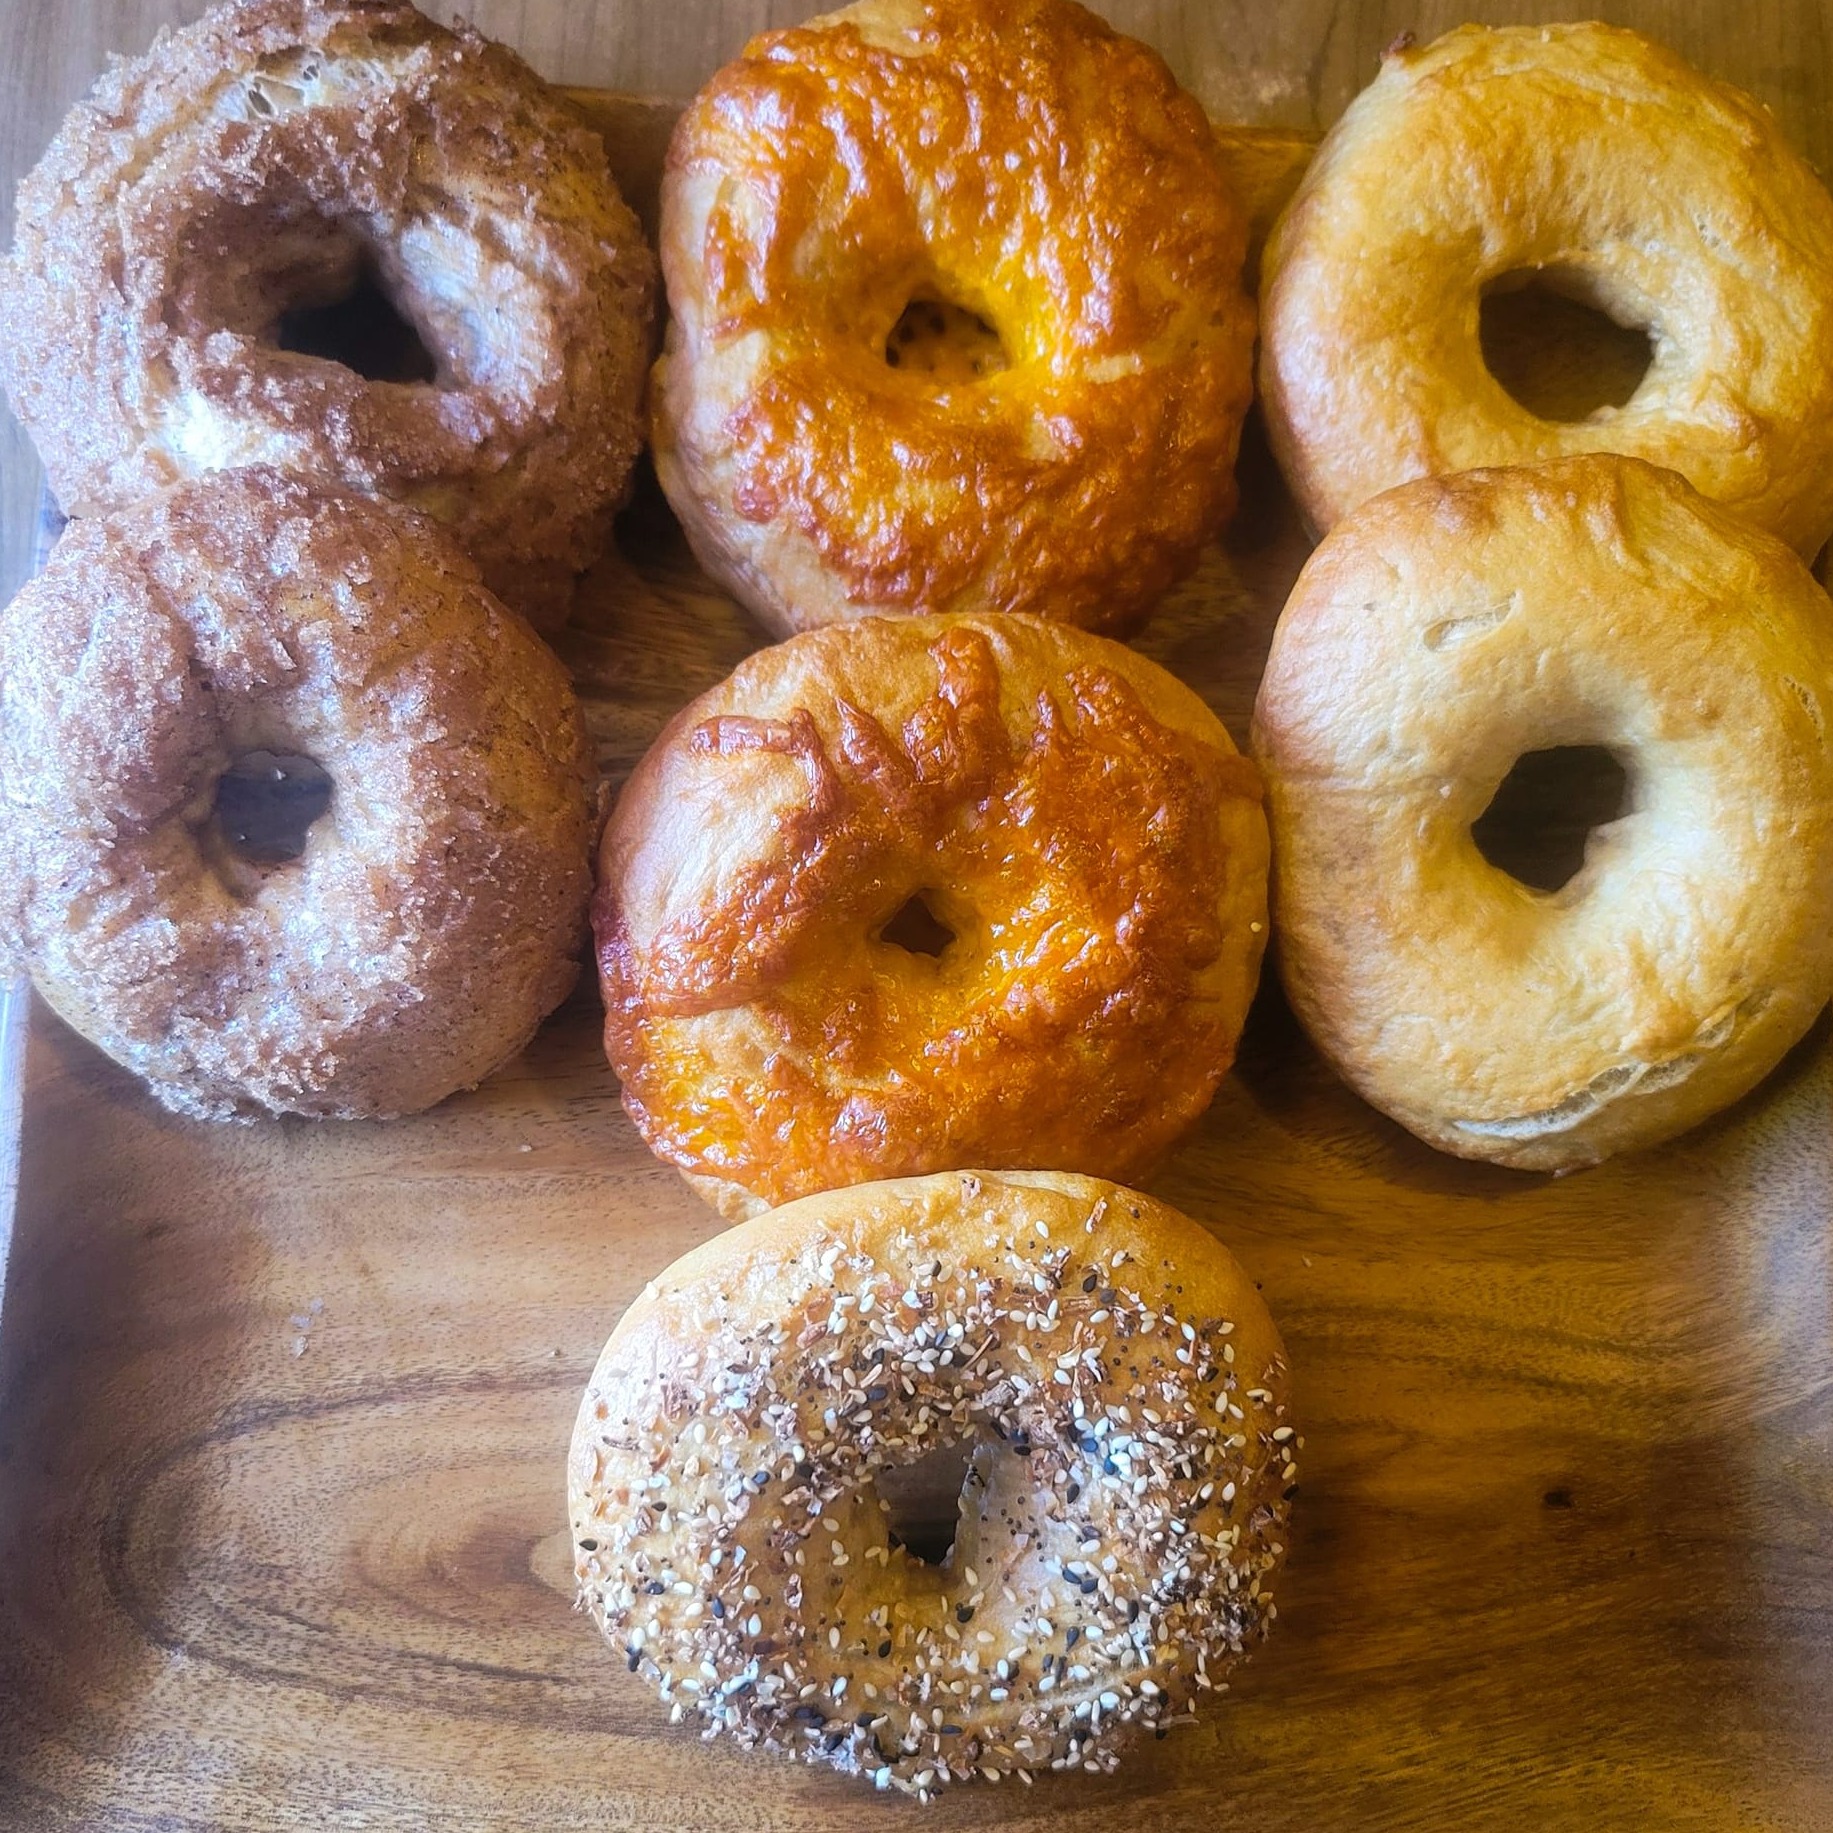 Sourdough Bagels - Available as Singles or 6 Packs